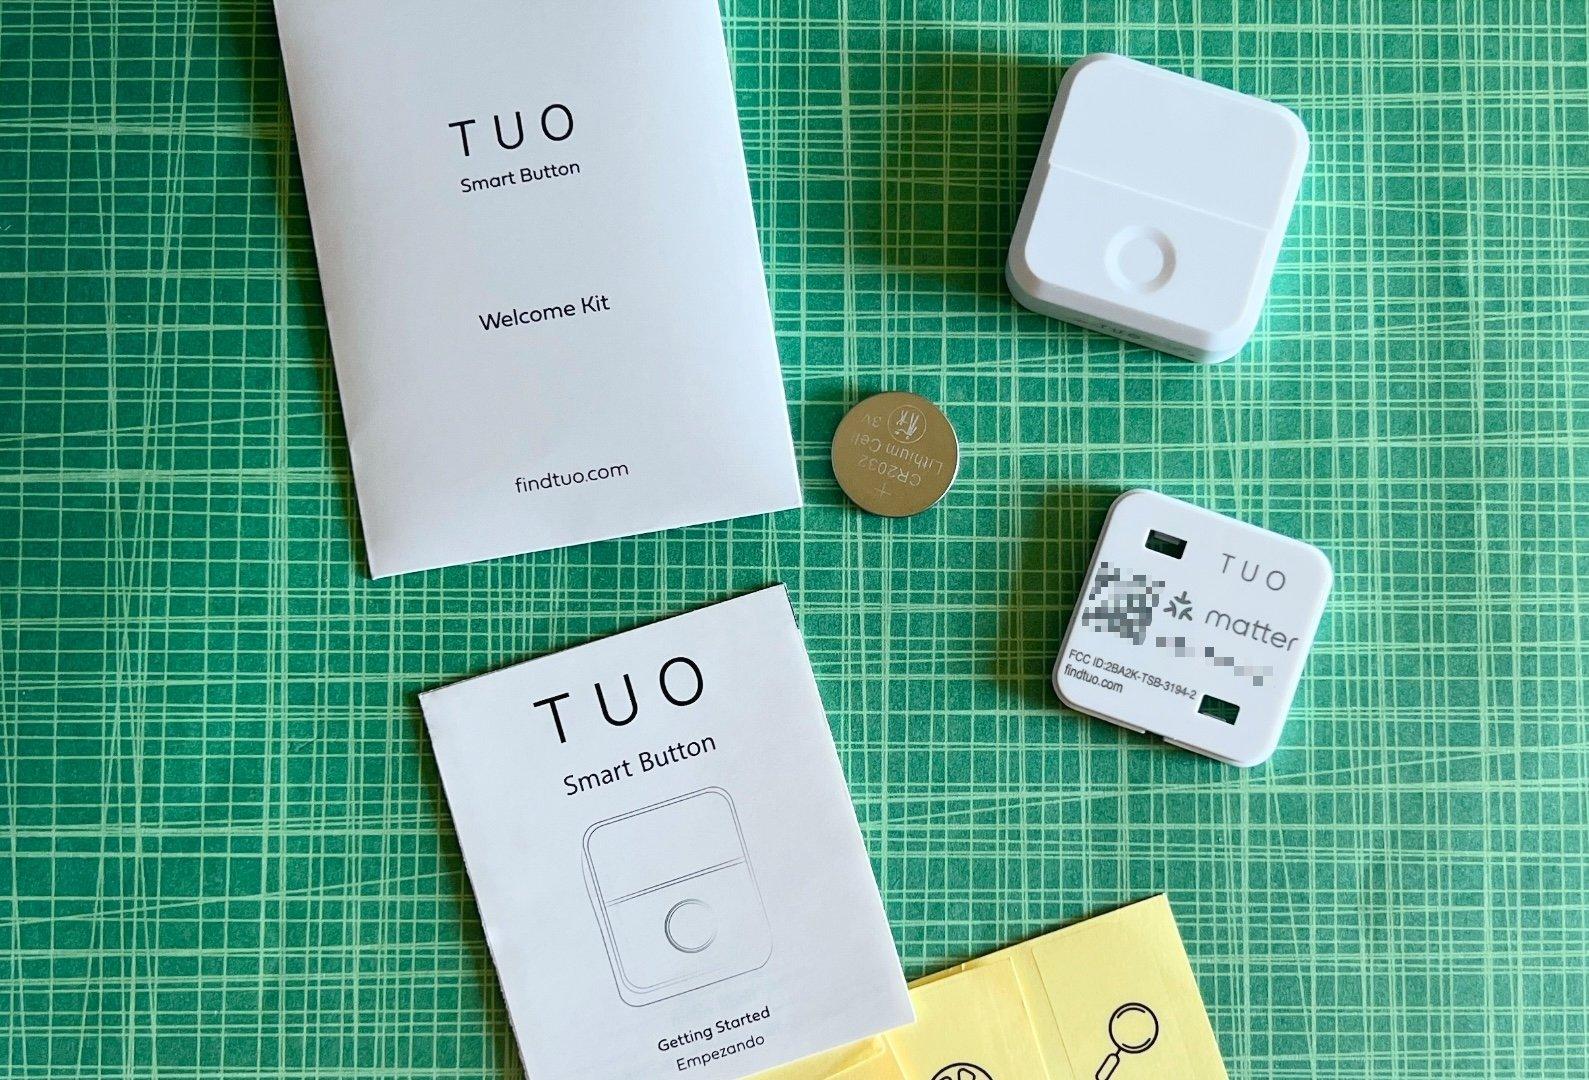 Tuo smart button review unboxed